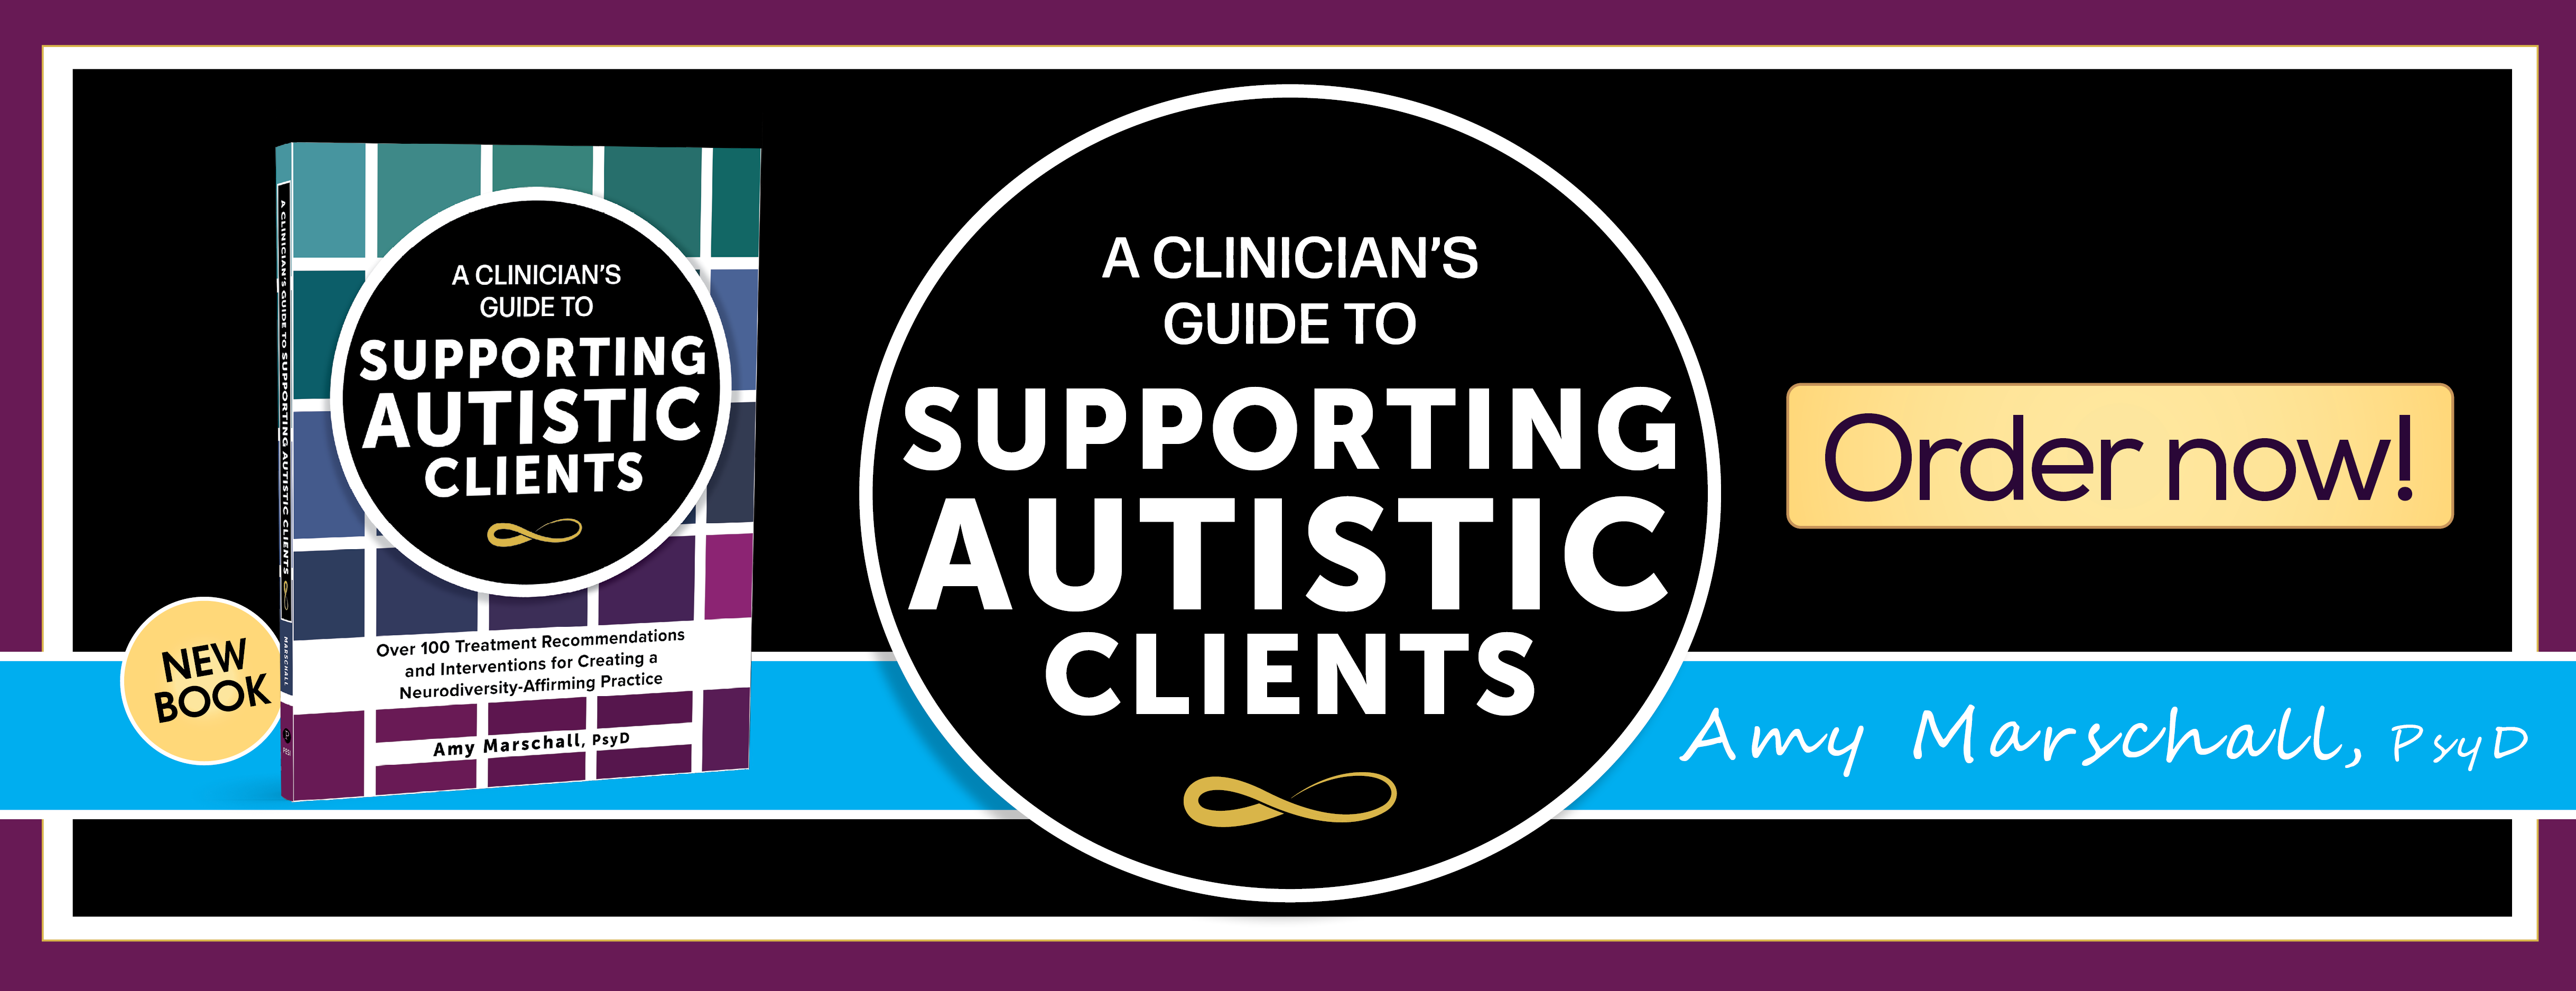 A Clinician’s Guide to Supporting Autistic Clients